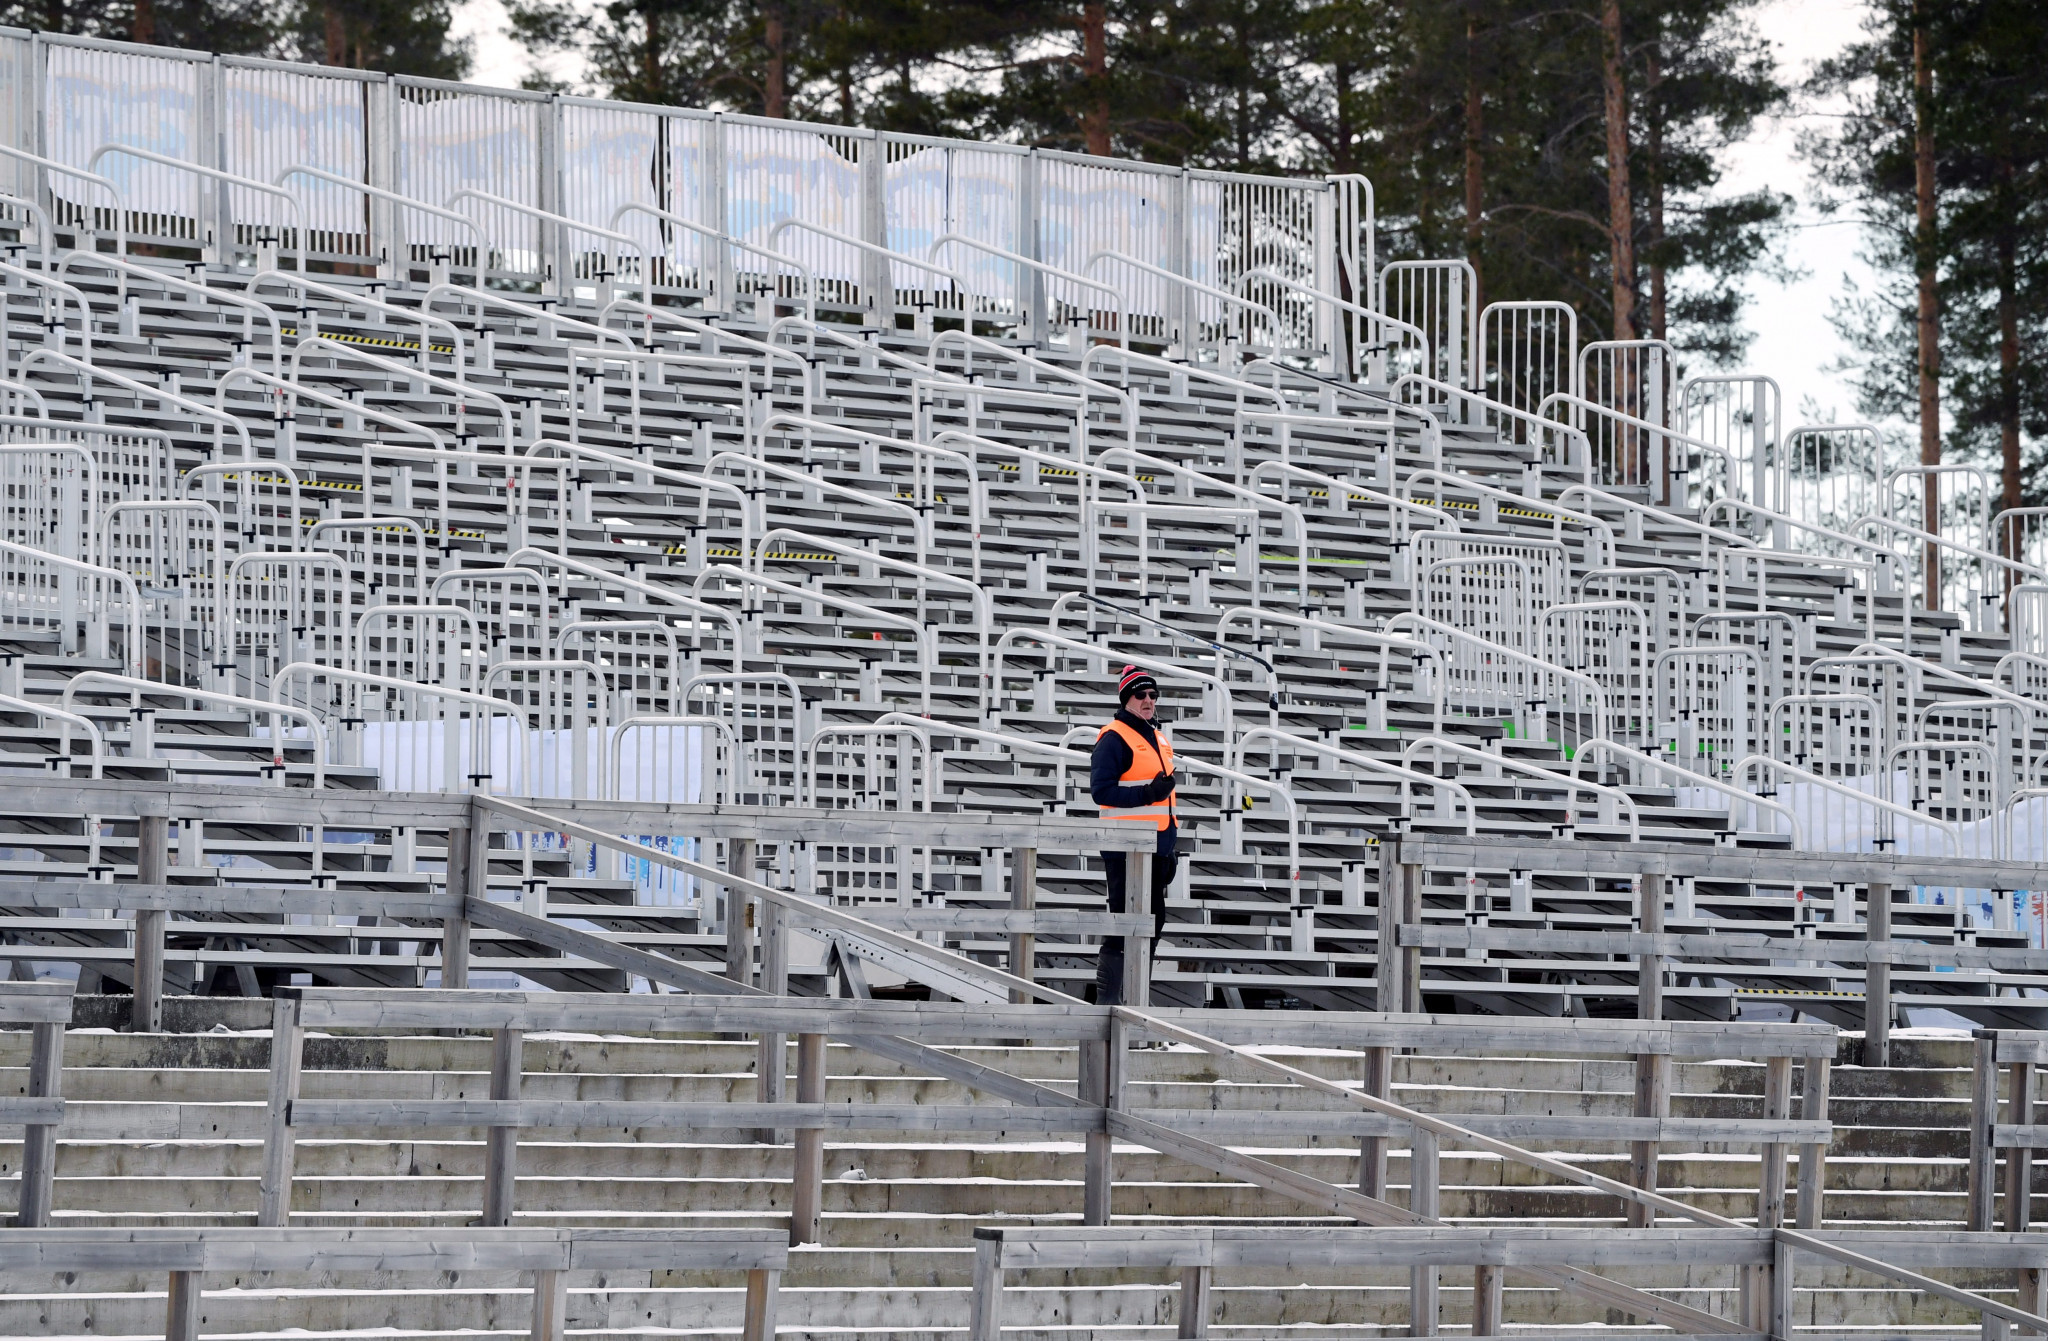 Restricted numbers of fans could attend IBU World Cup in Kontiolahti